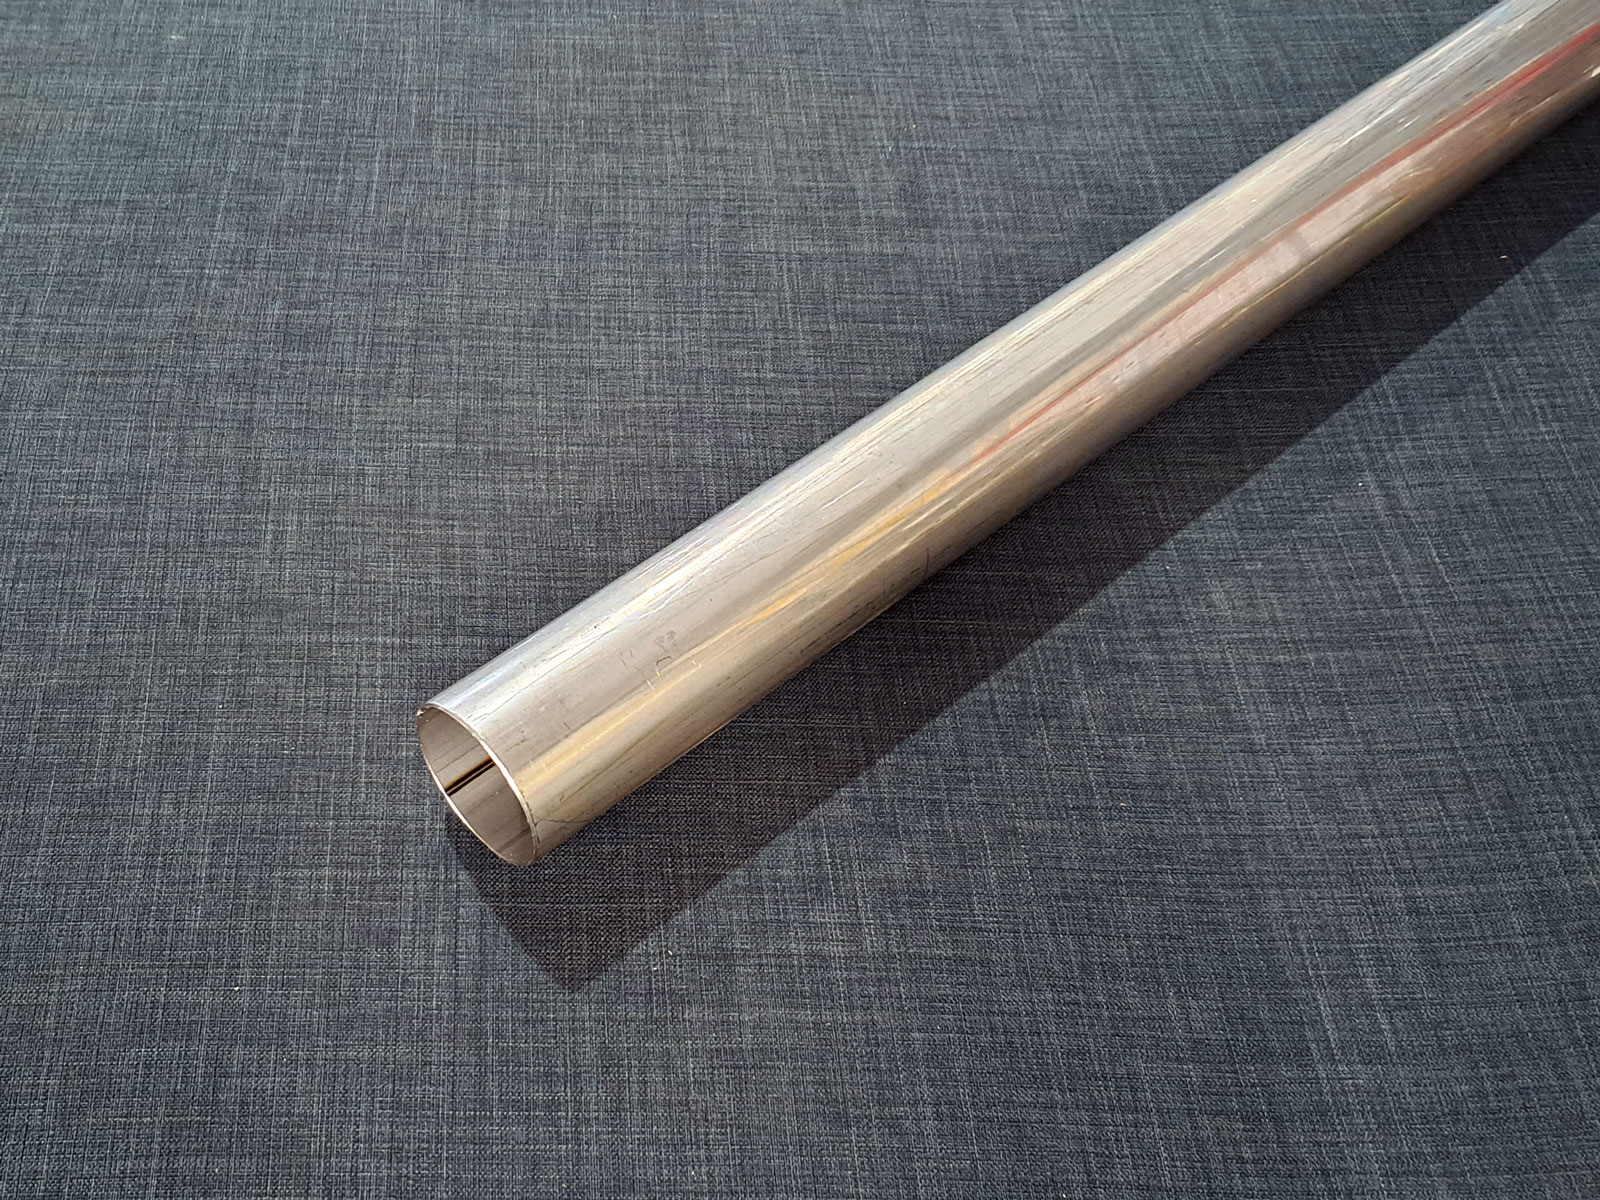 44.45mm x 2mm Stainless Steel Tubing